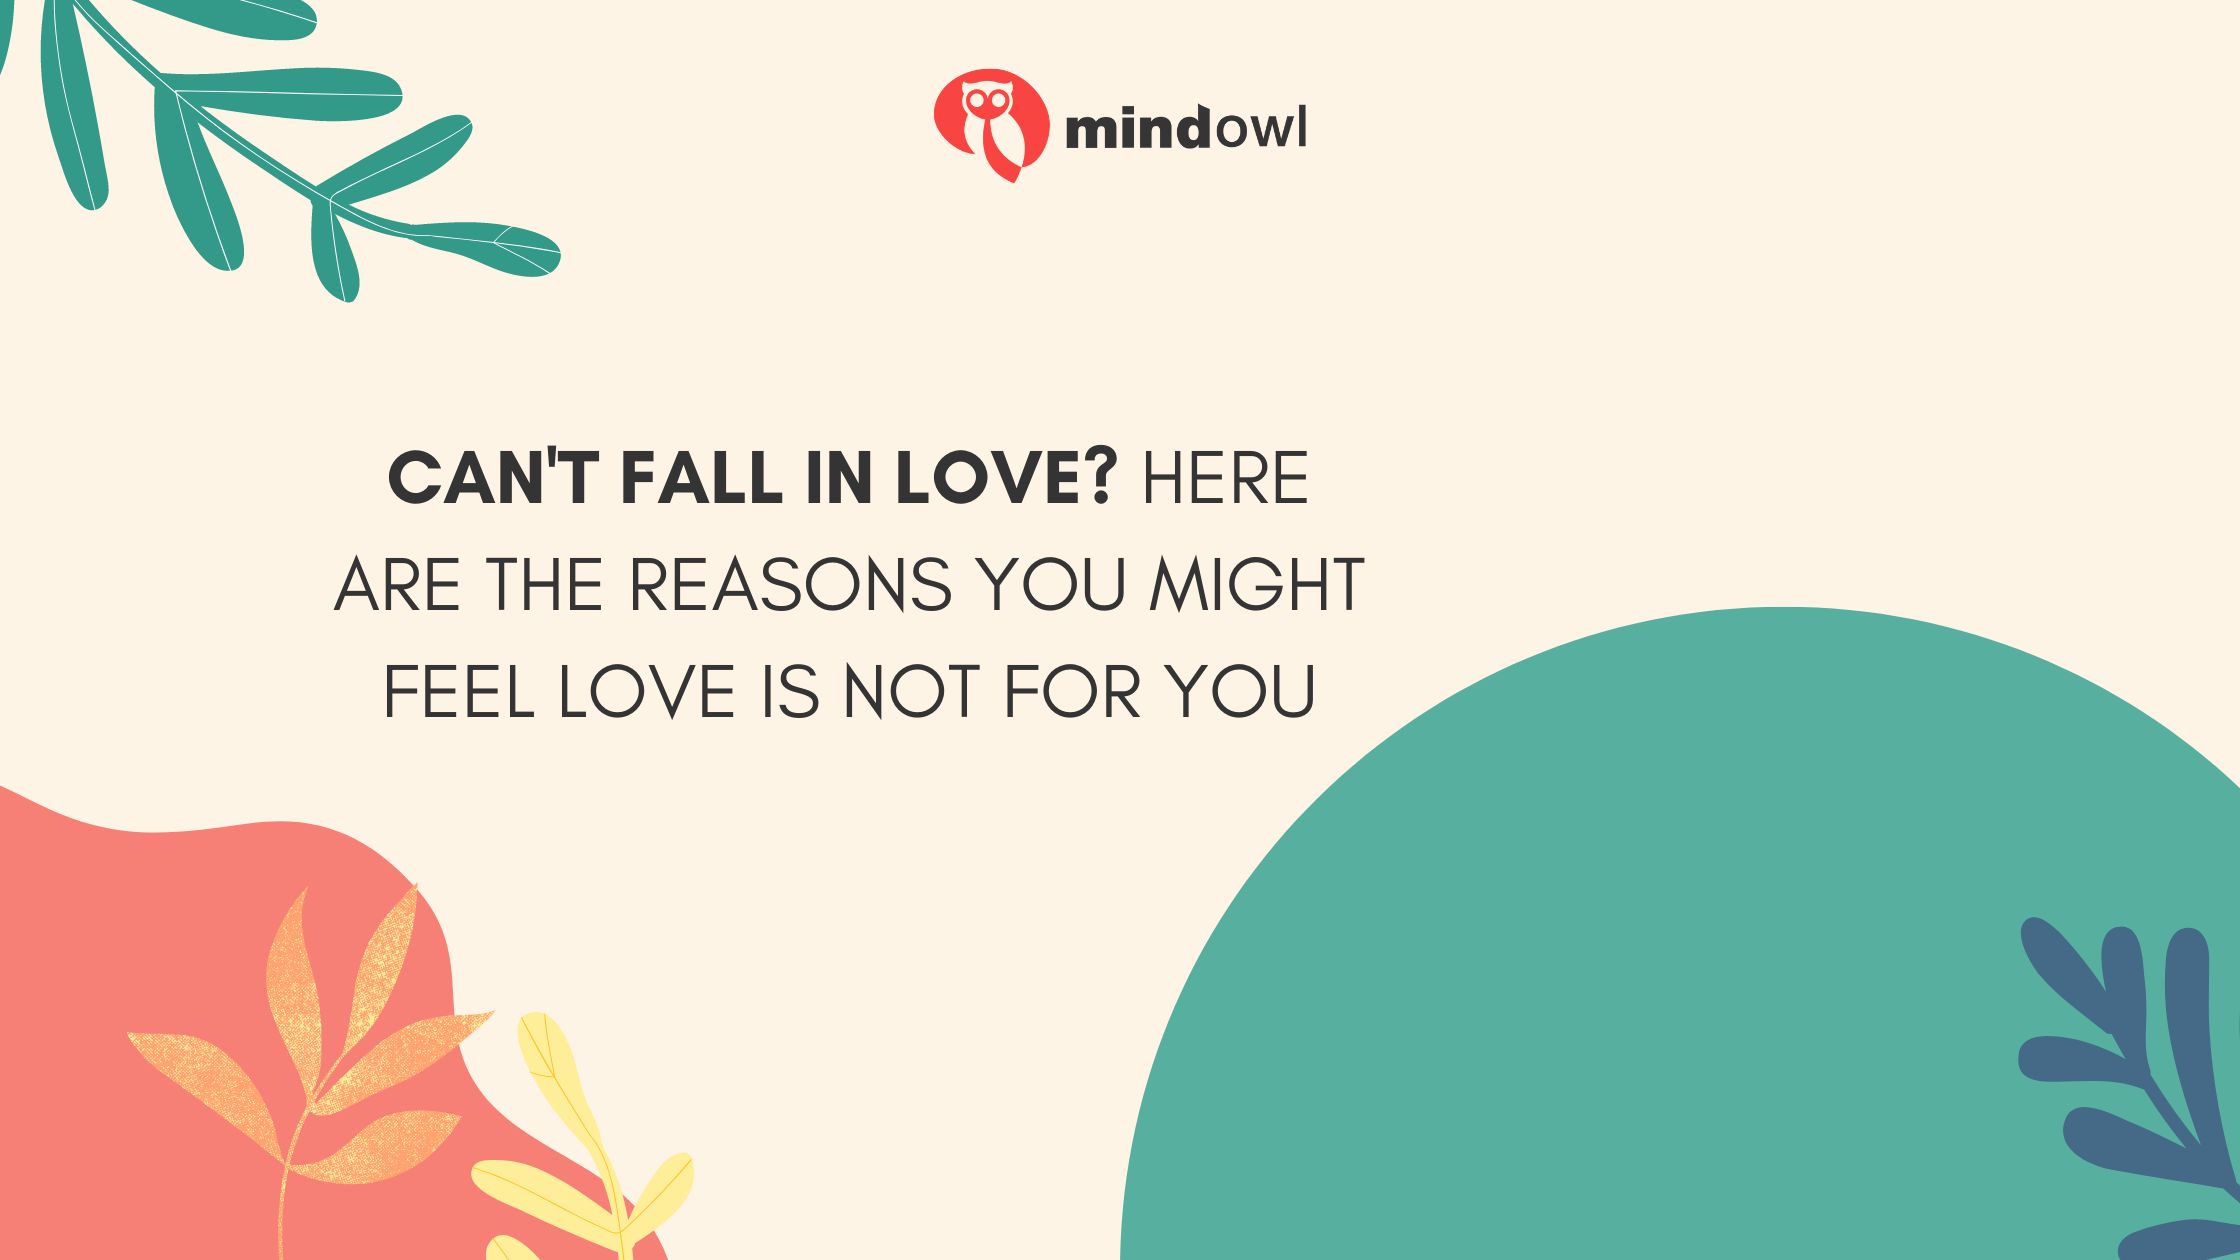 Can’t Fall in Love? Here are the reasons you might feel love is not for you